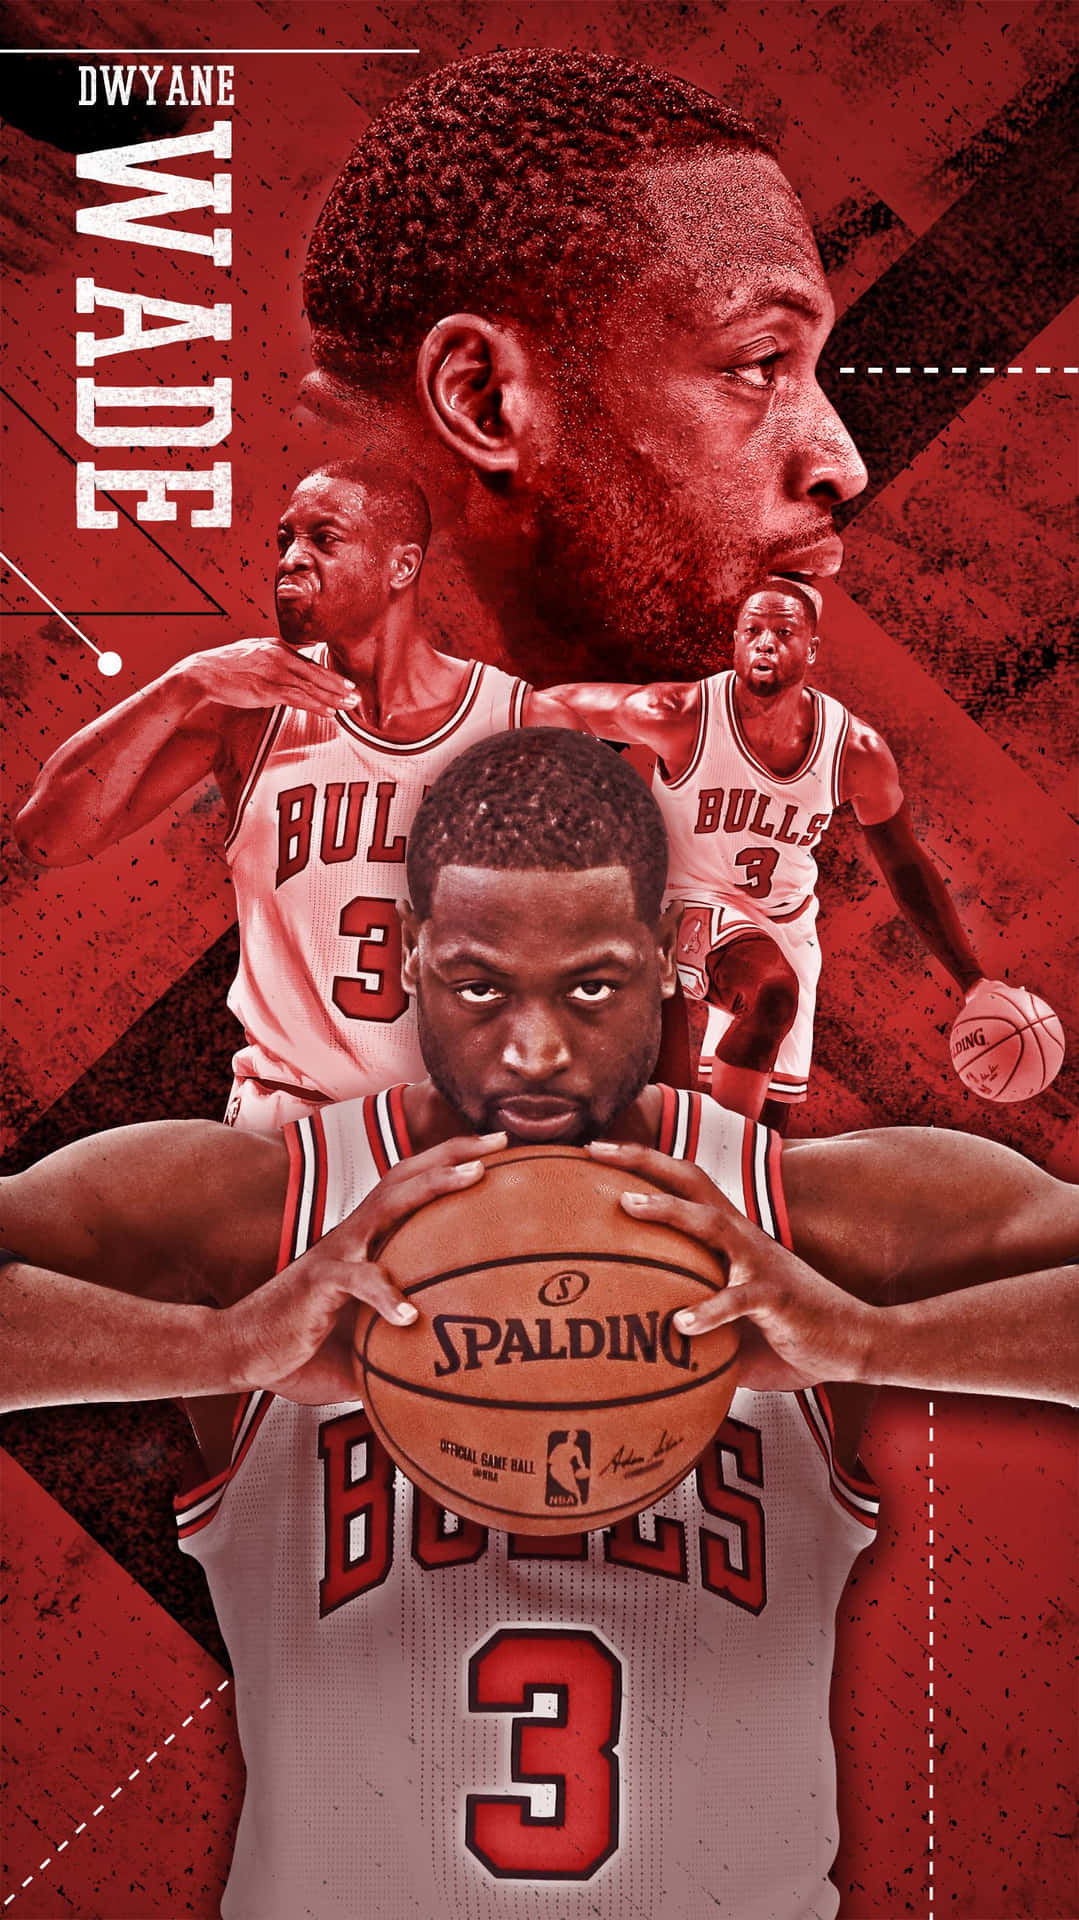 Get ready for game day by bringing your Chicago Bulls spirit to the stands! Wallpaper